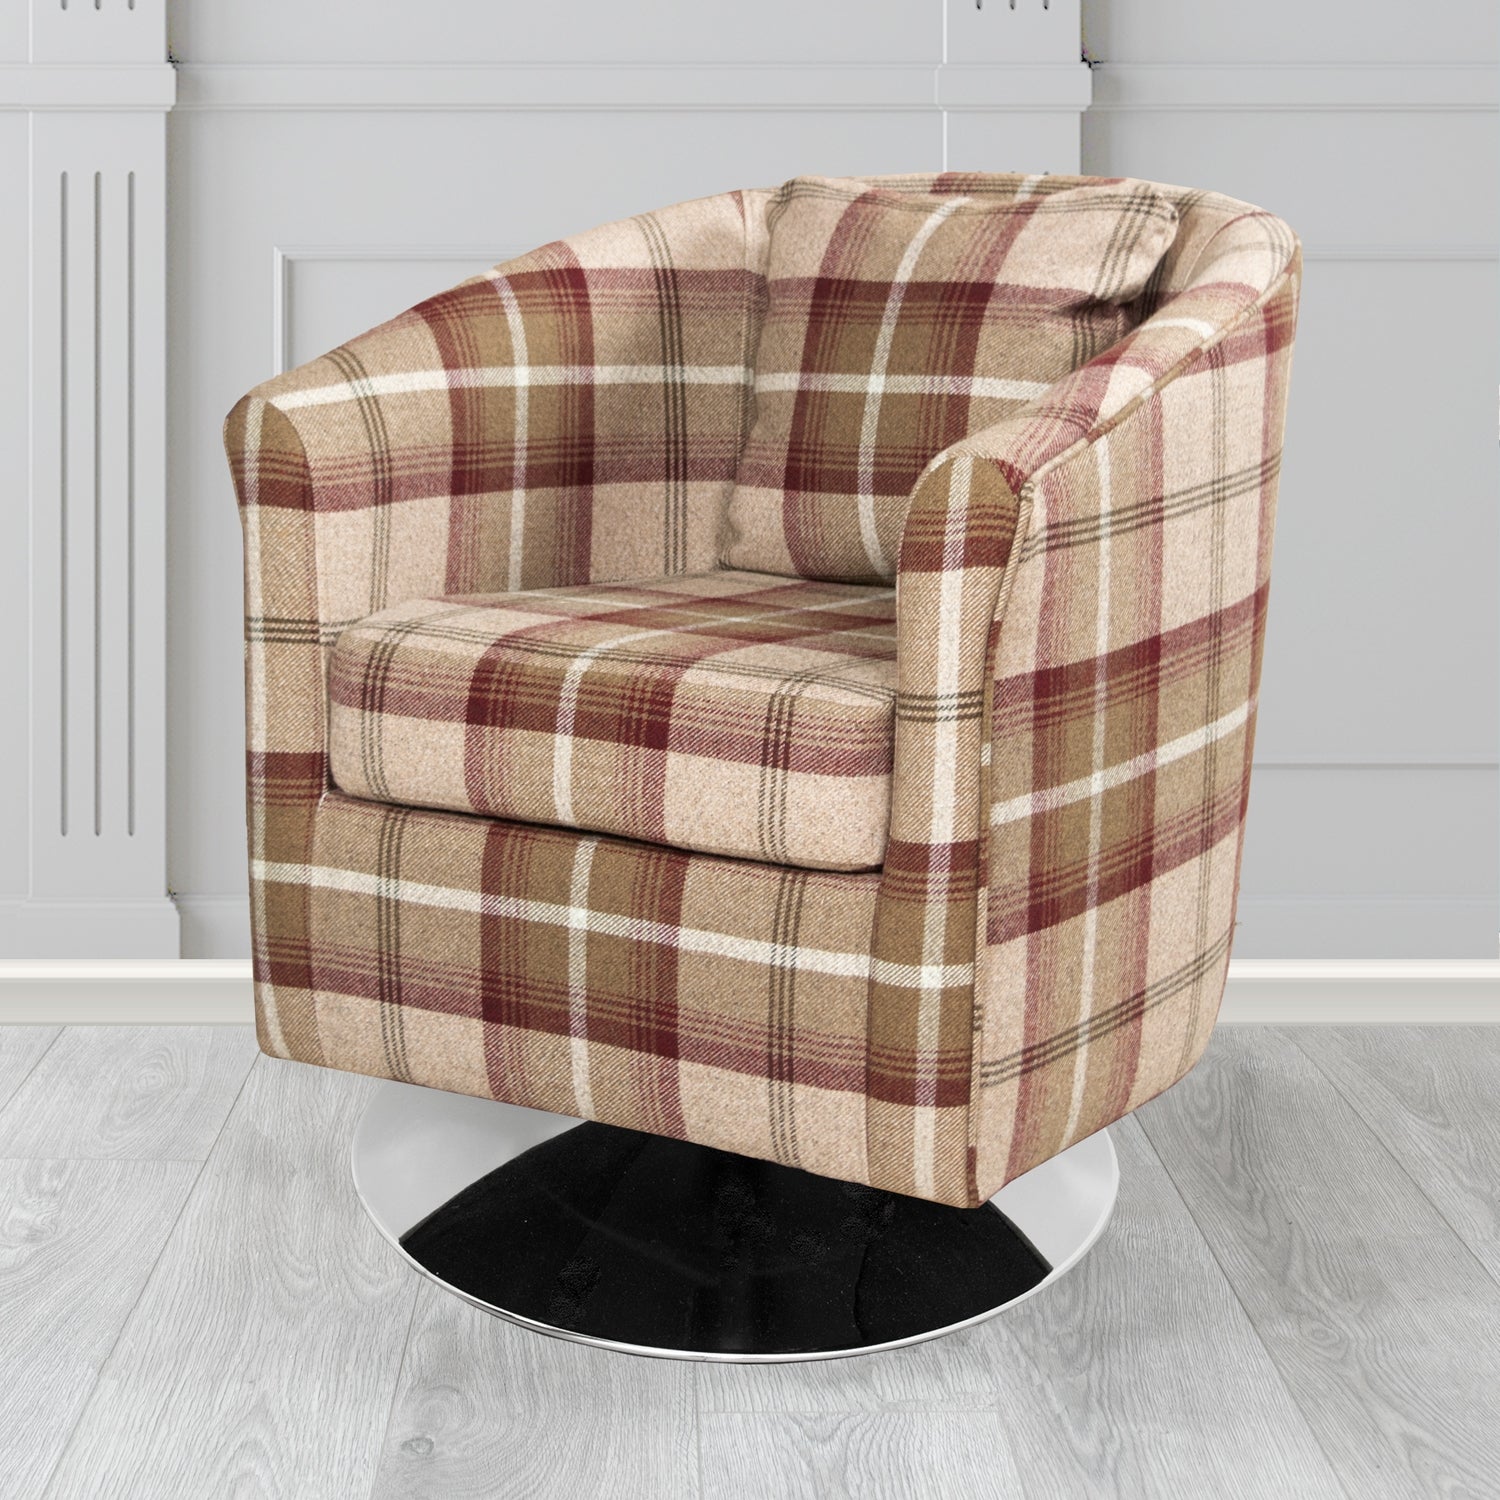 St Tropez Balmoral Mulberry Tartan Fabric Swivel Tub Chair with Scatter Cushion - The Tub Chair Shop